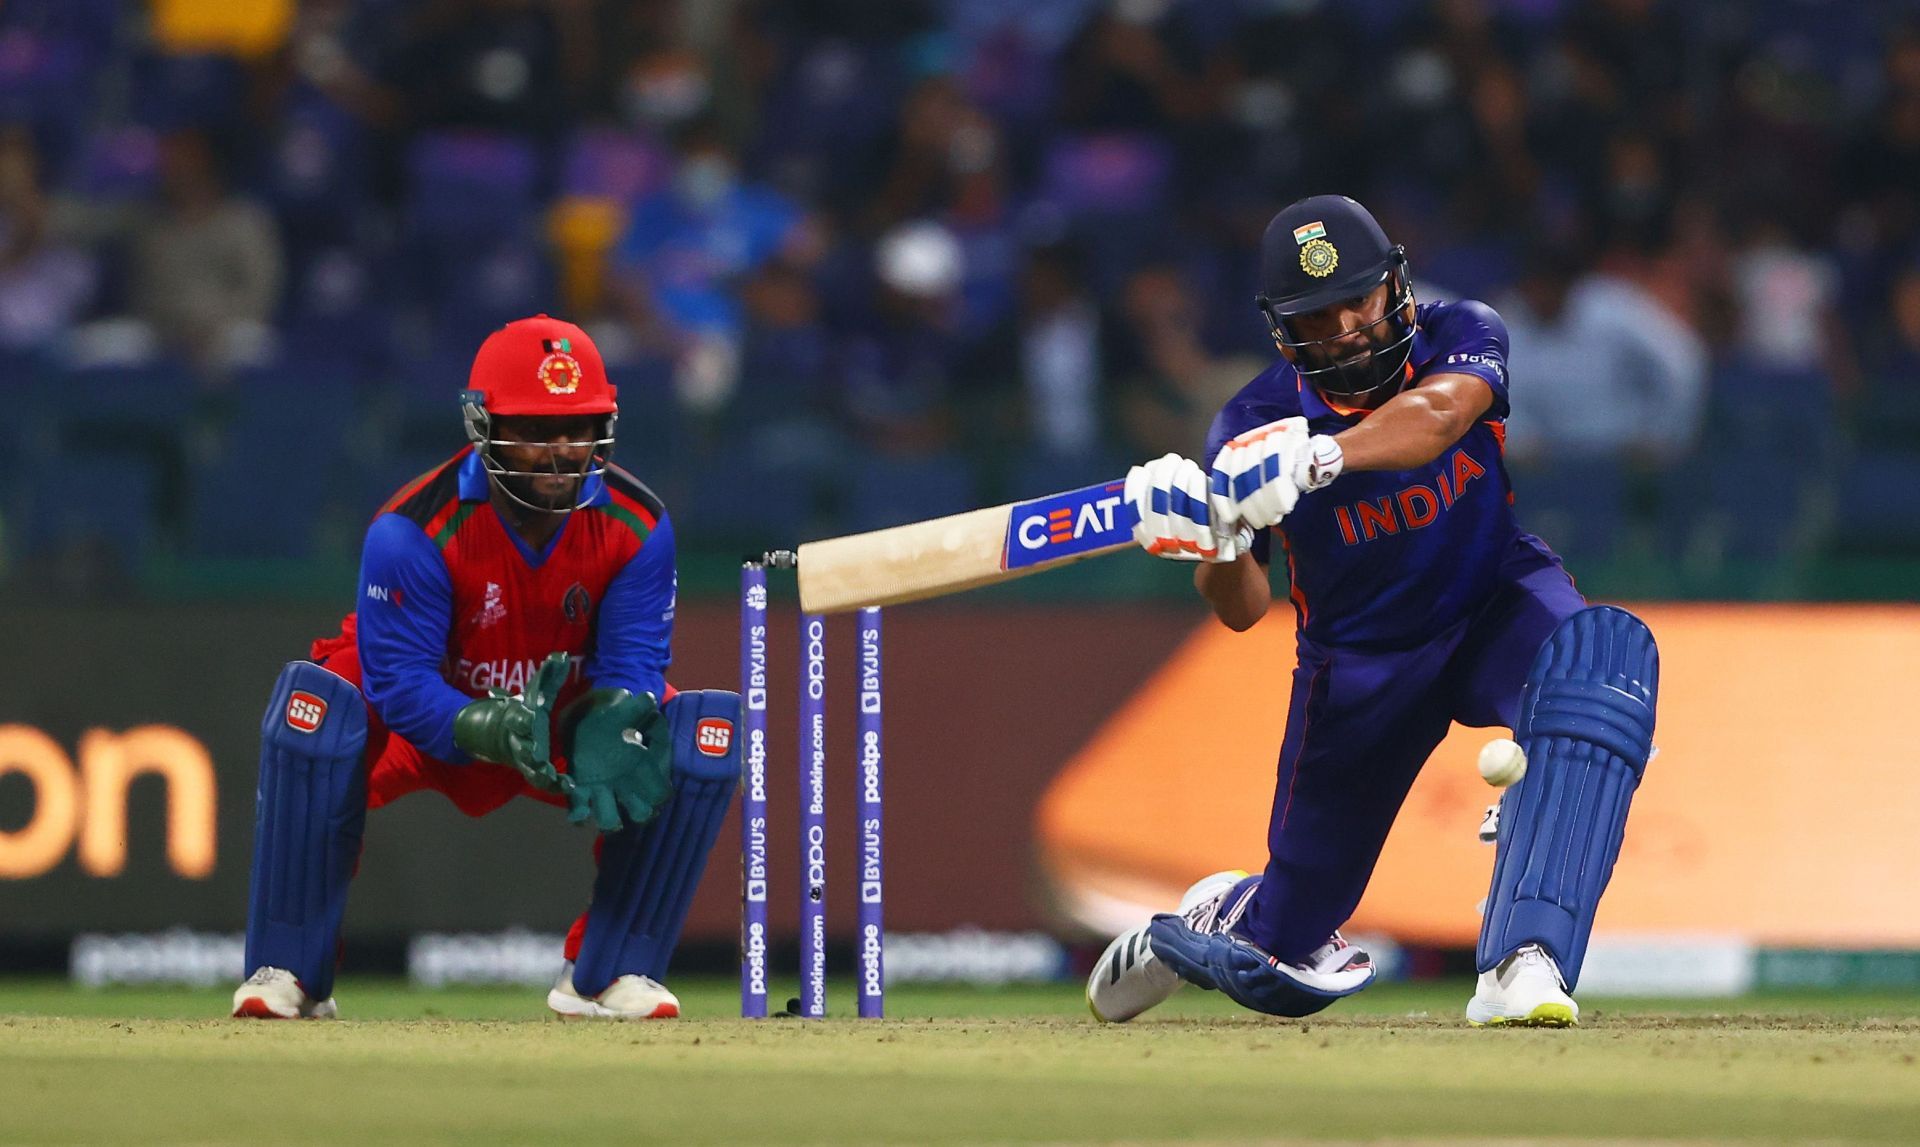 Rohit Sharma was the Player of the Match in the India-Afghanistan World Cup game.